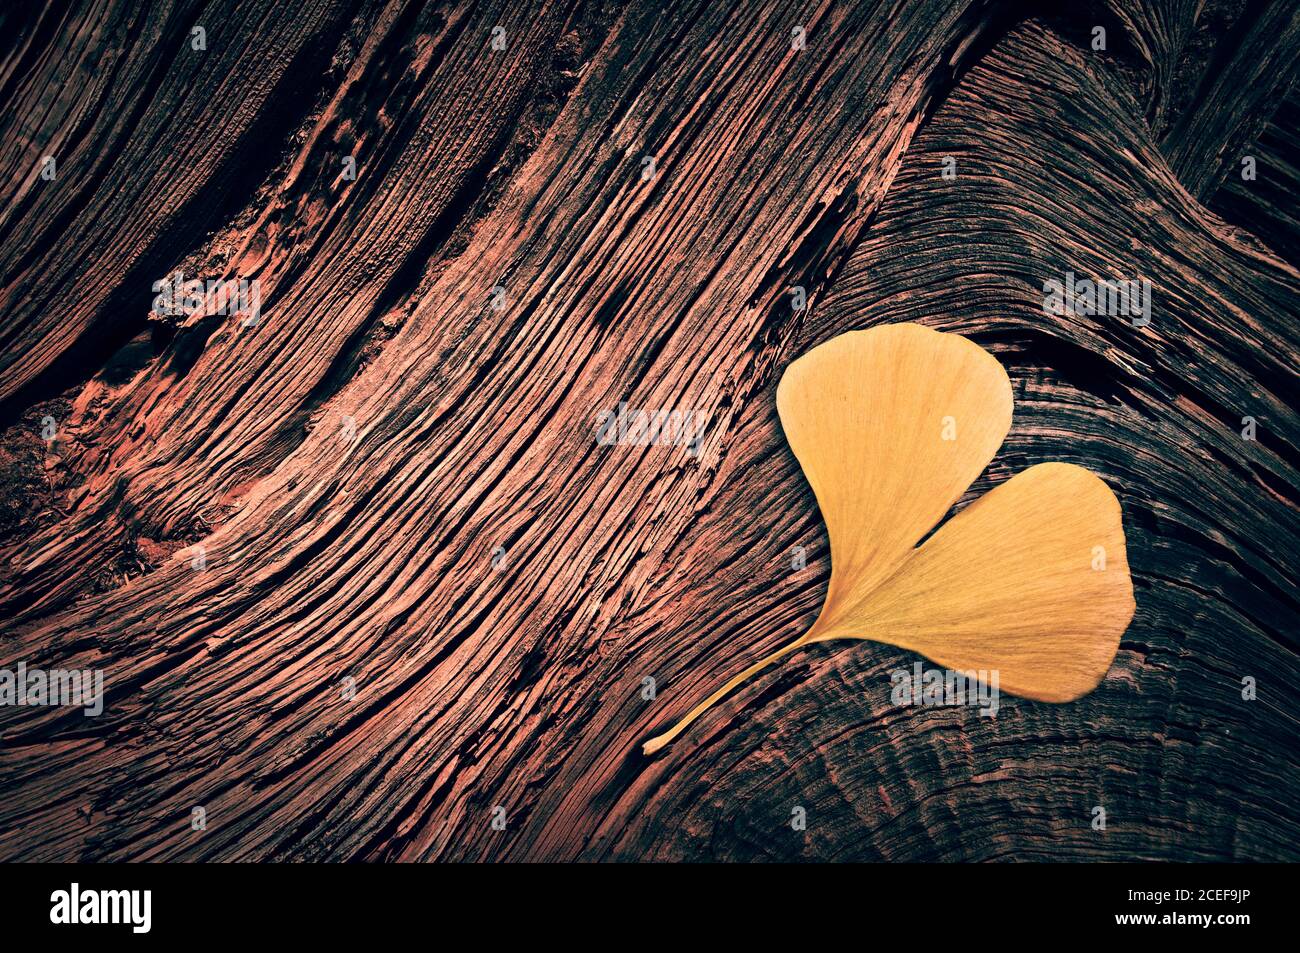 Yellow ginkgo biloba leaf in the shape of a heart on wood trunk background in autumn Stock Photo